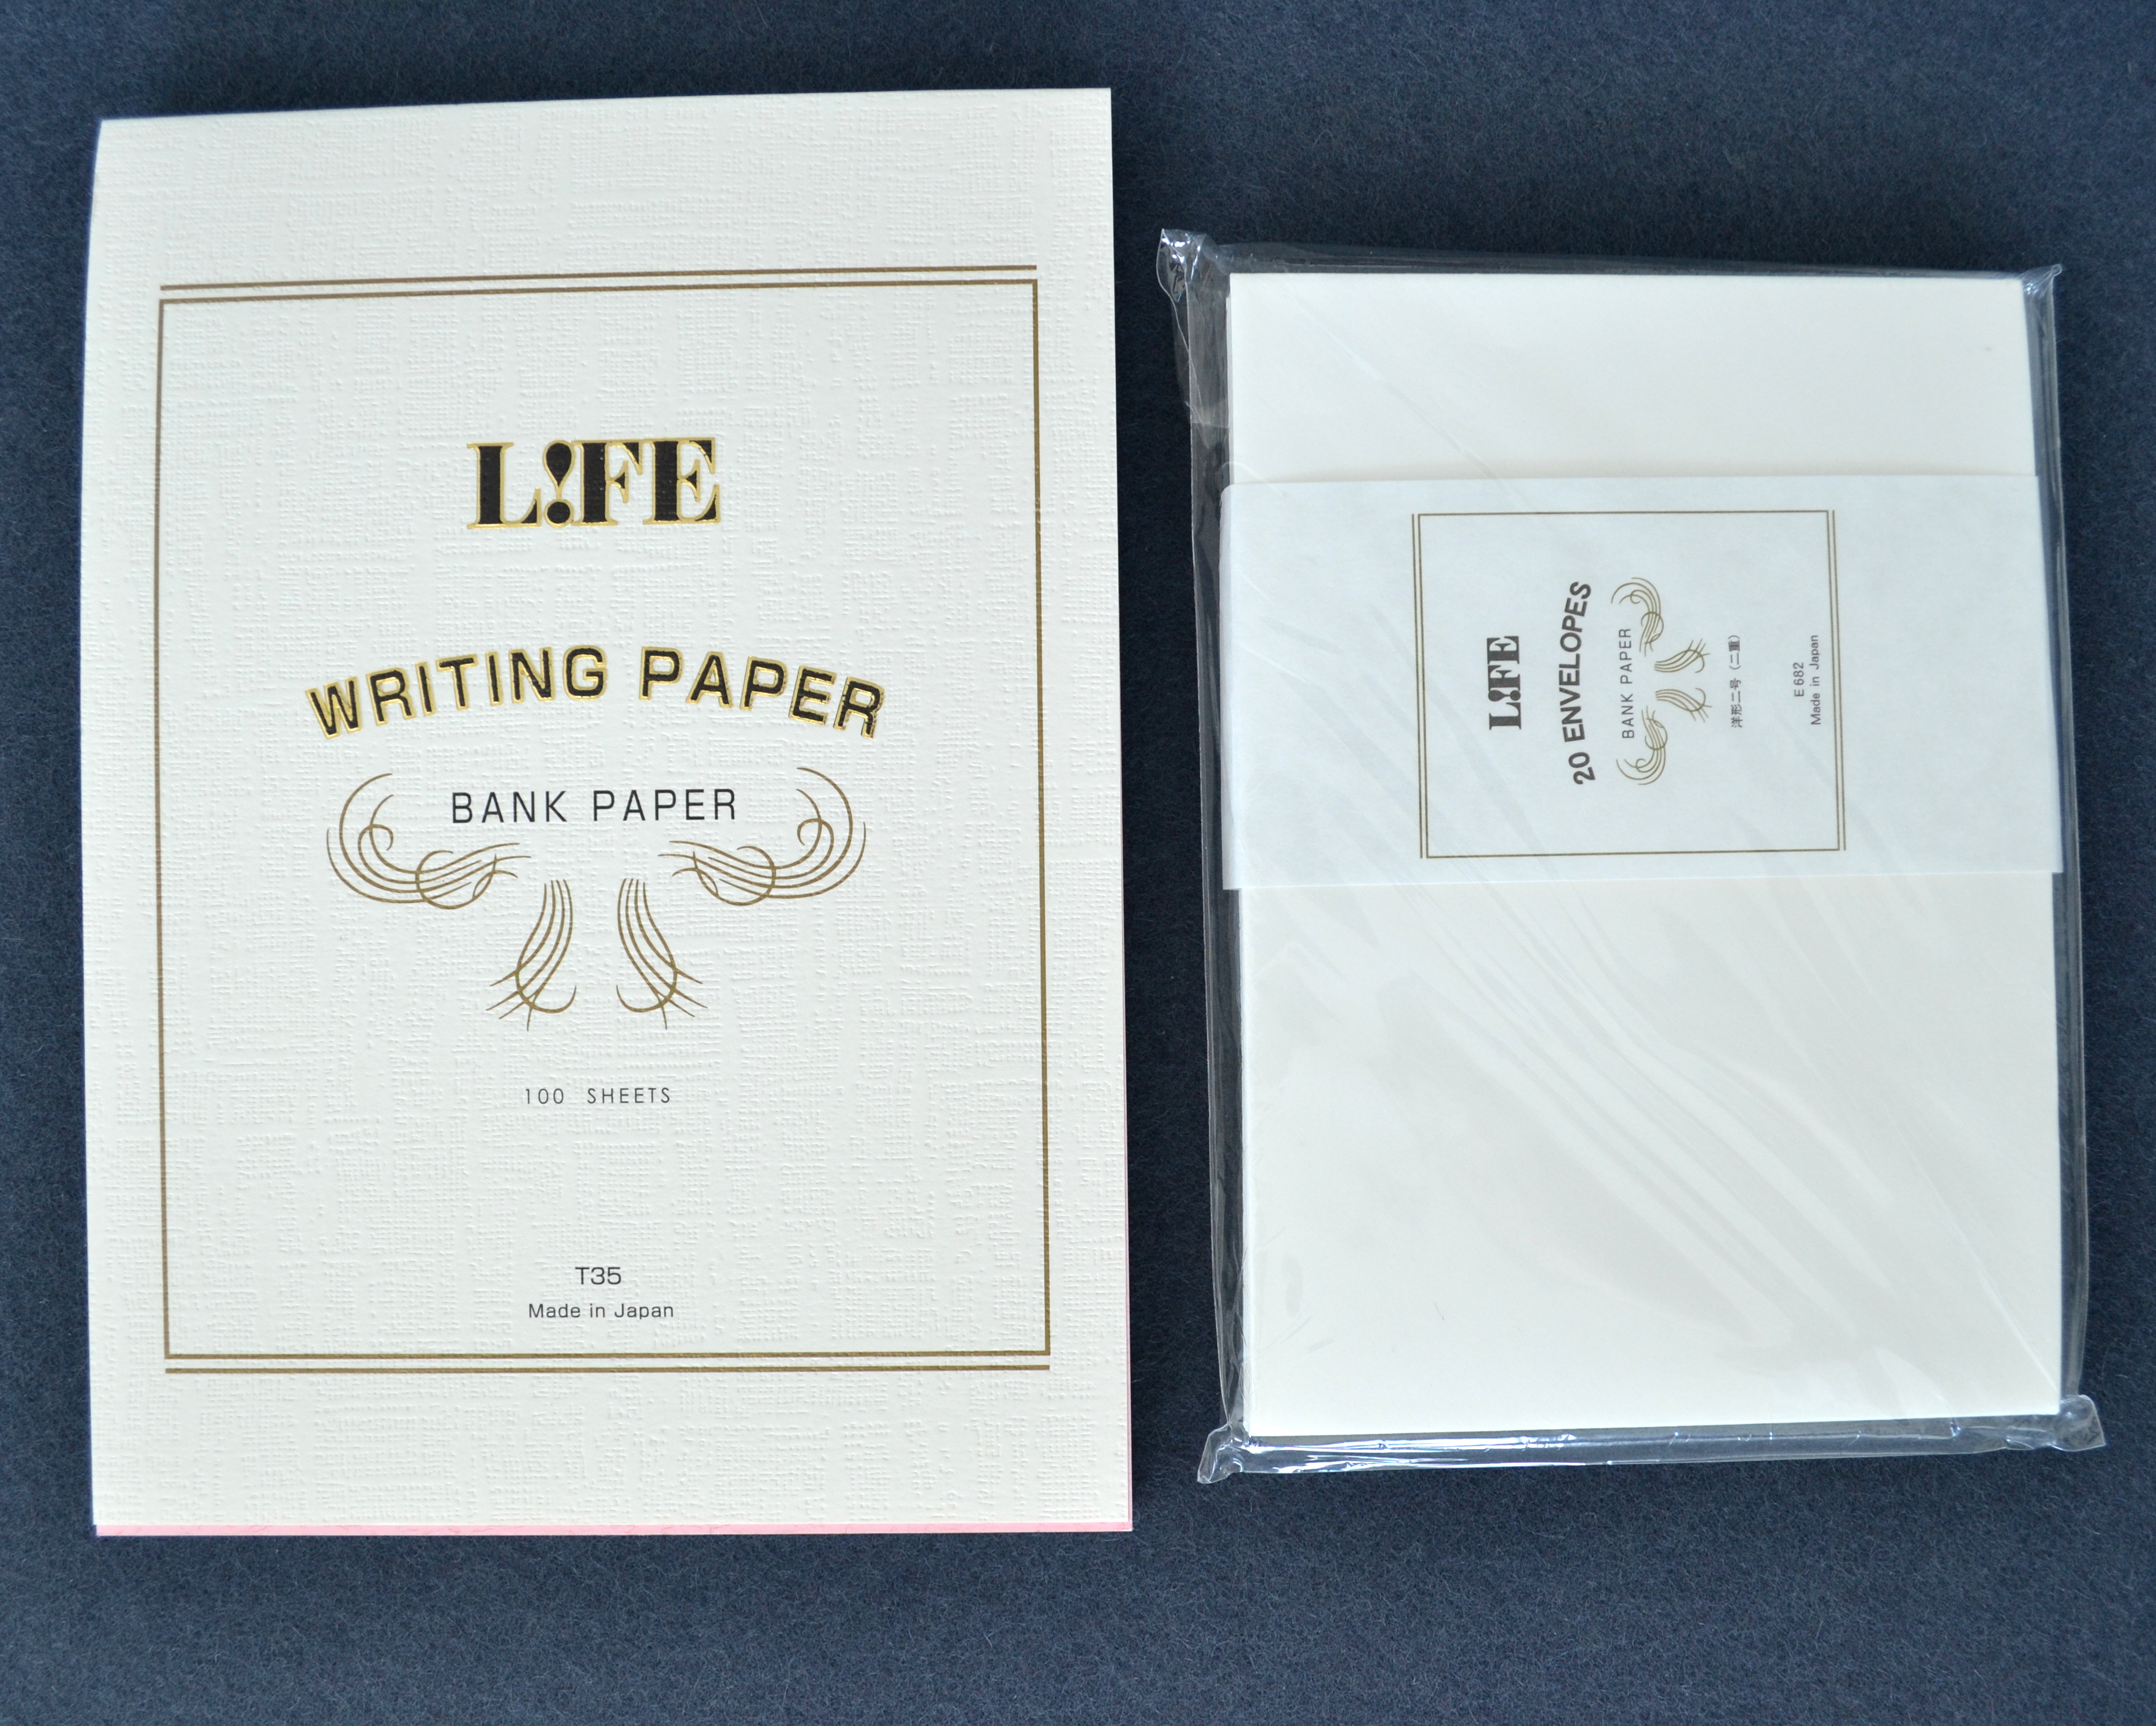 LIFE Bank Paper Stationery 